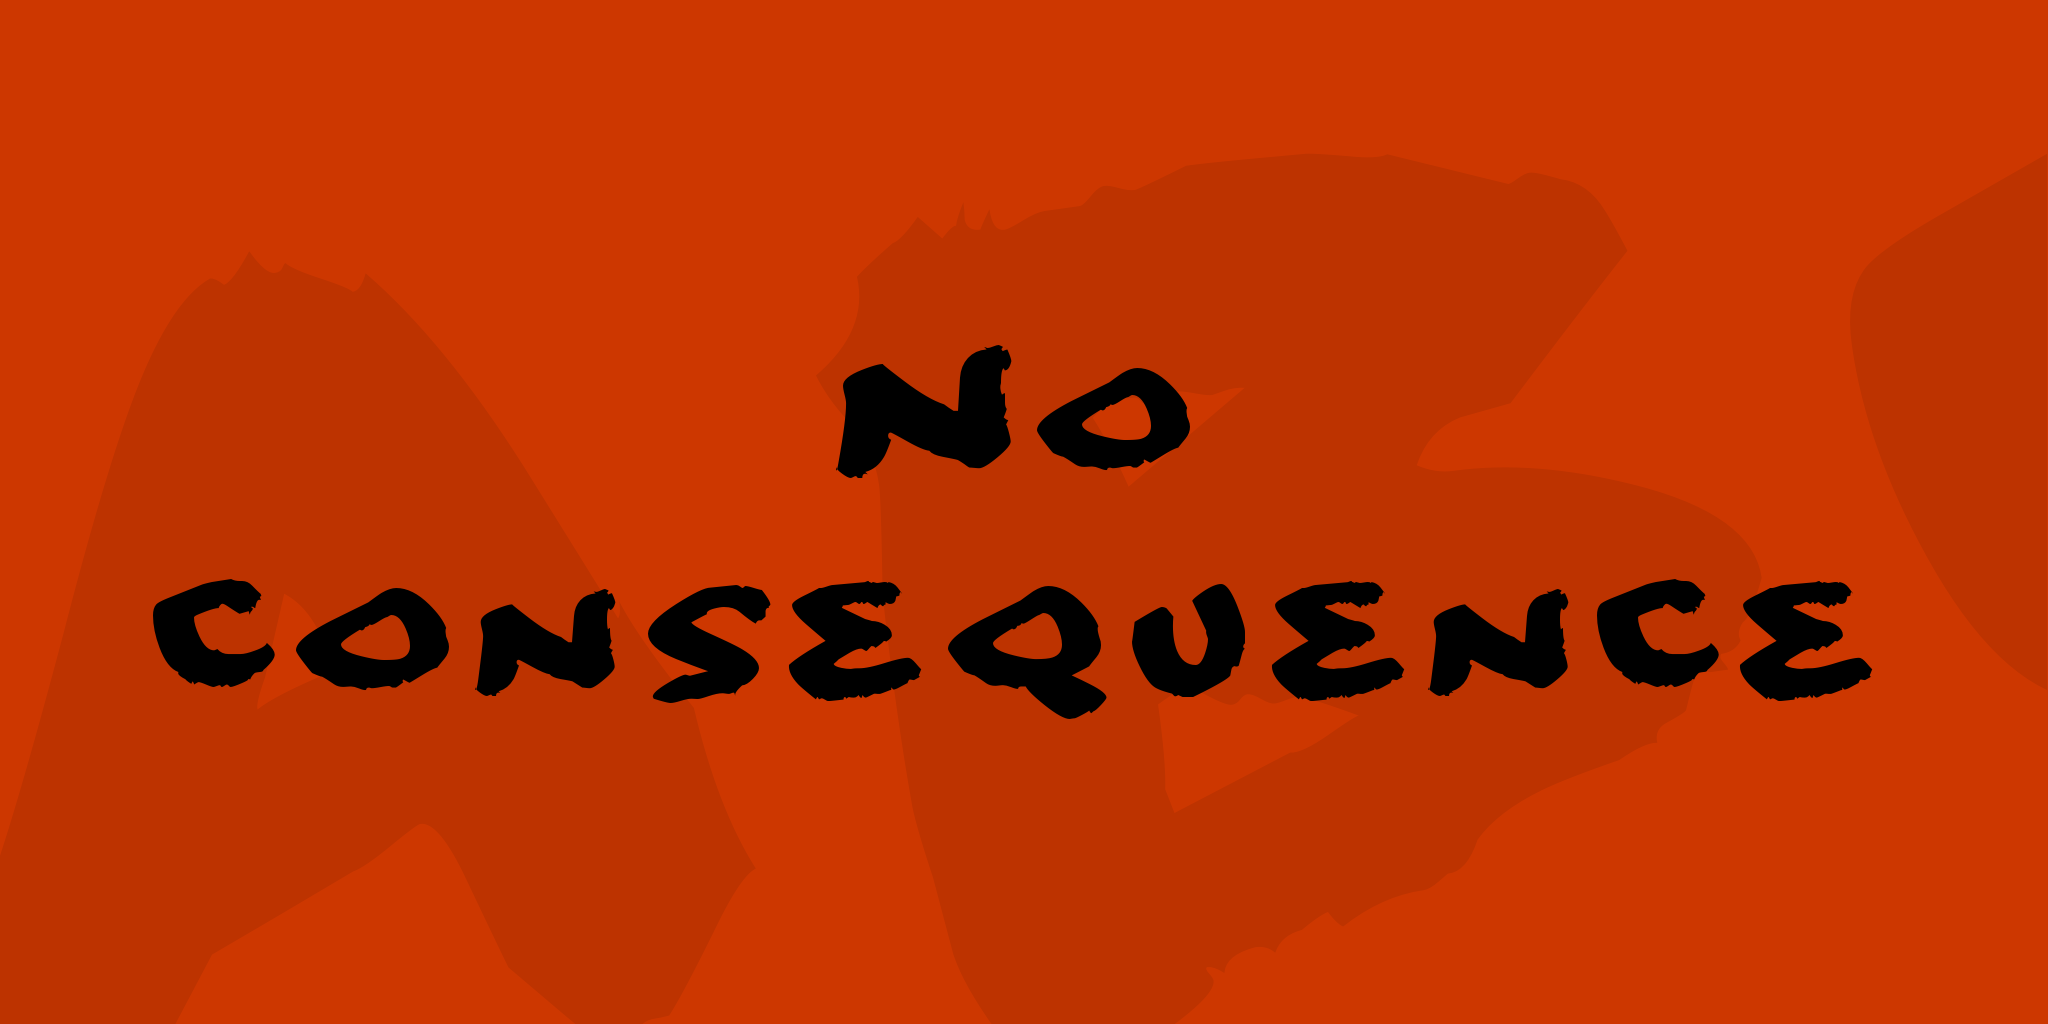 No Consequence